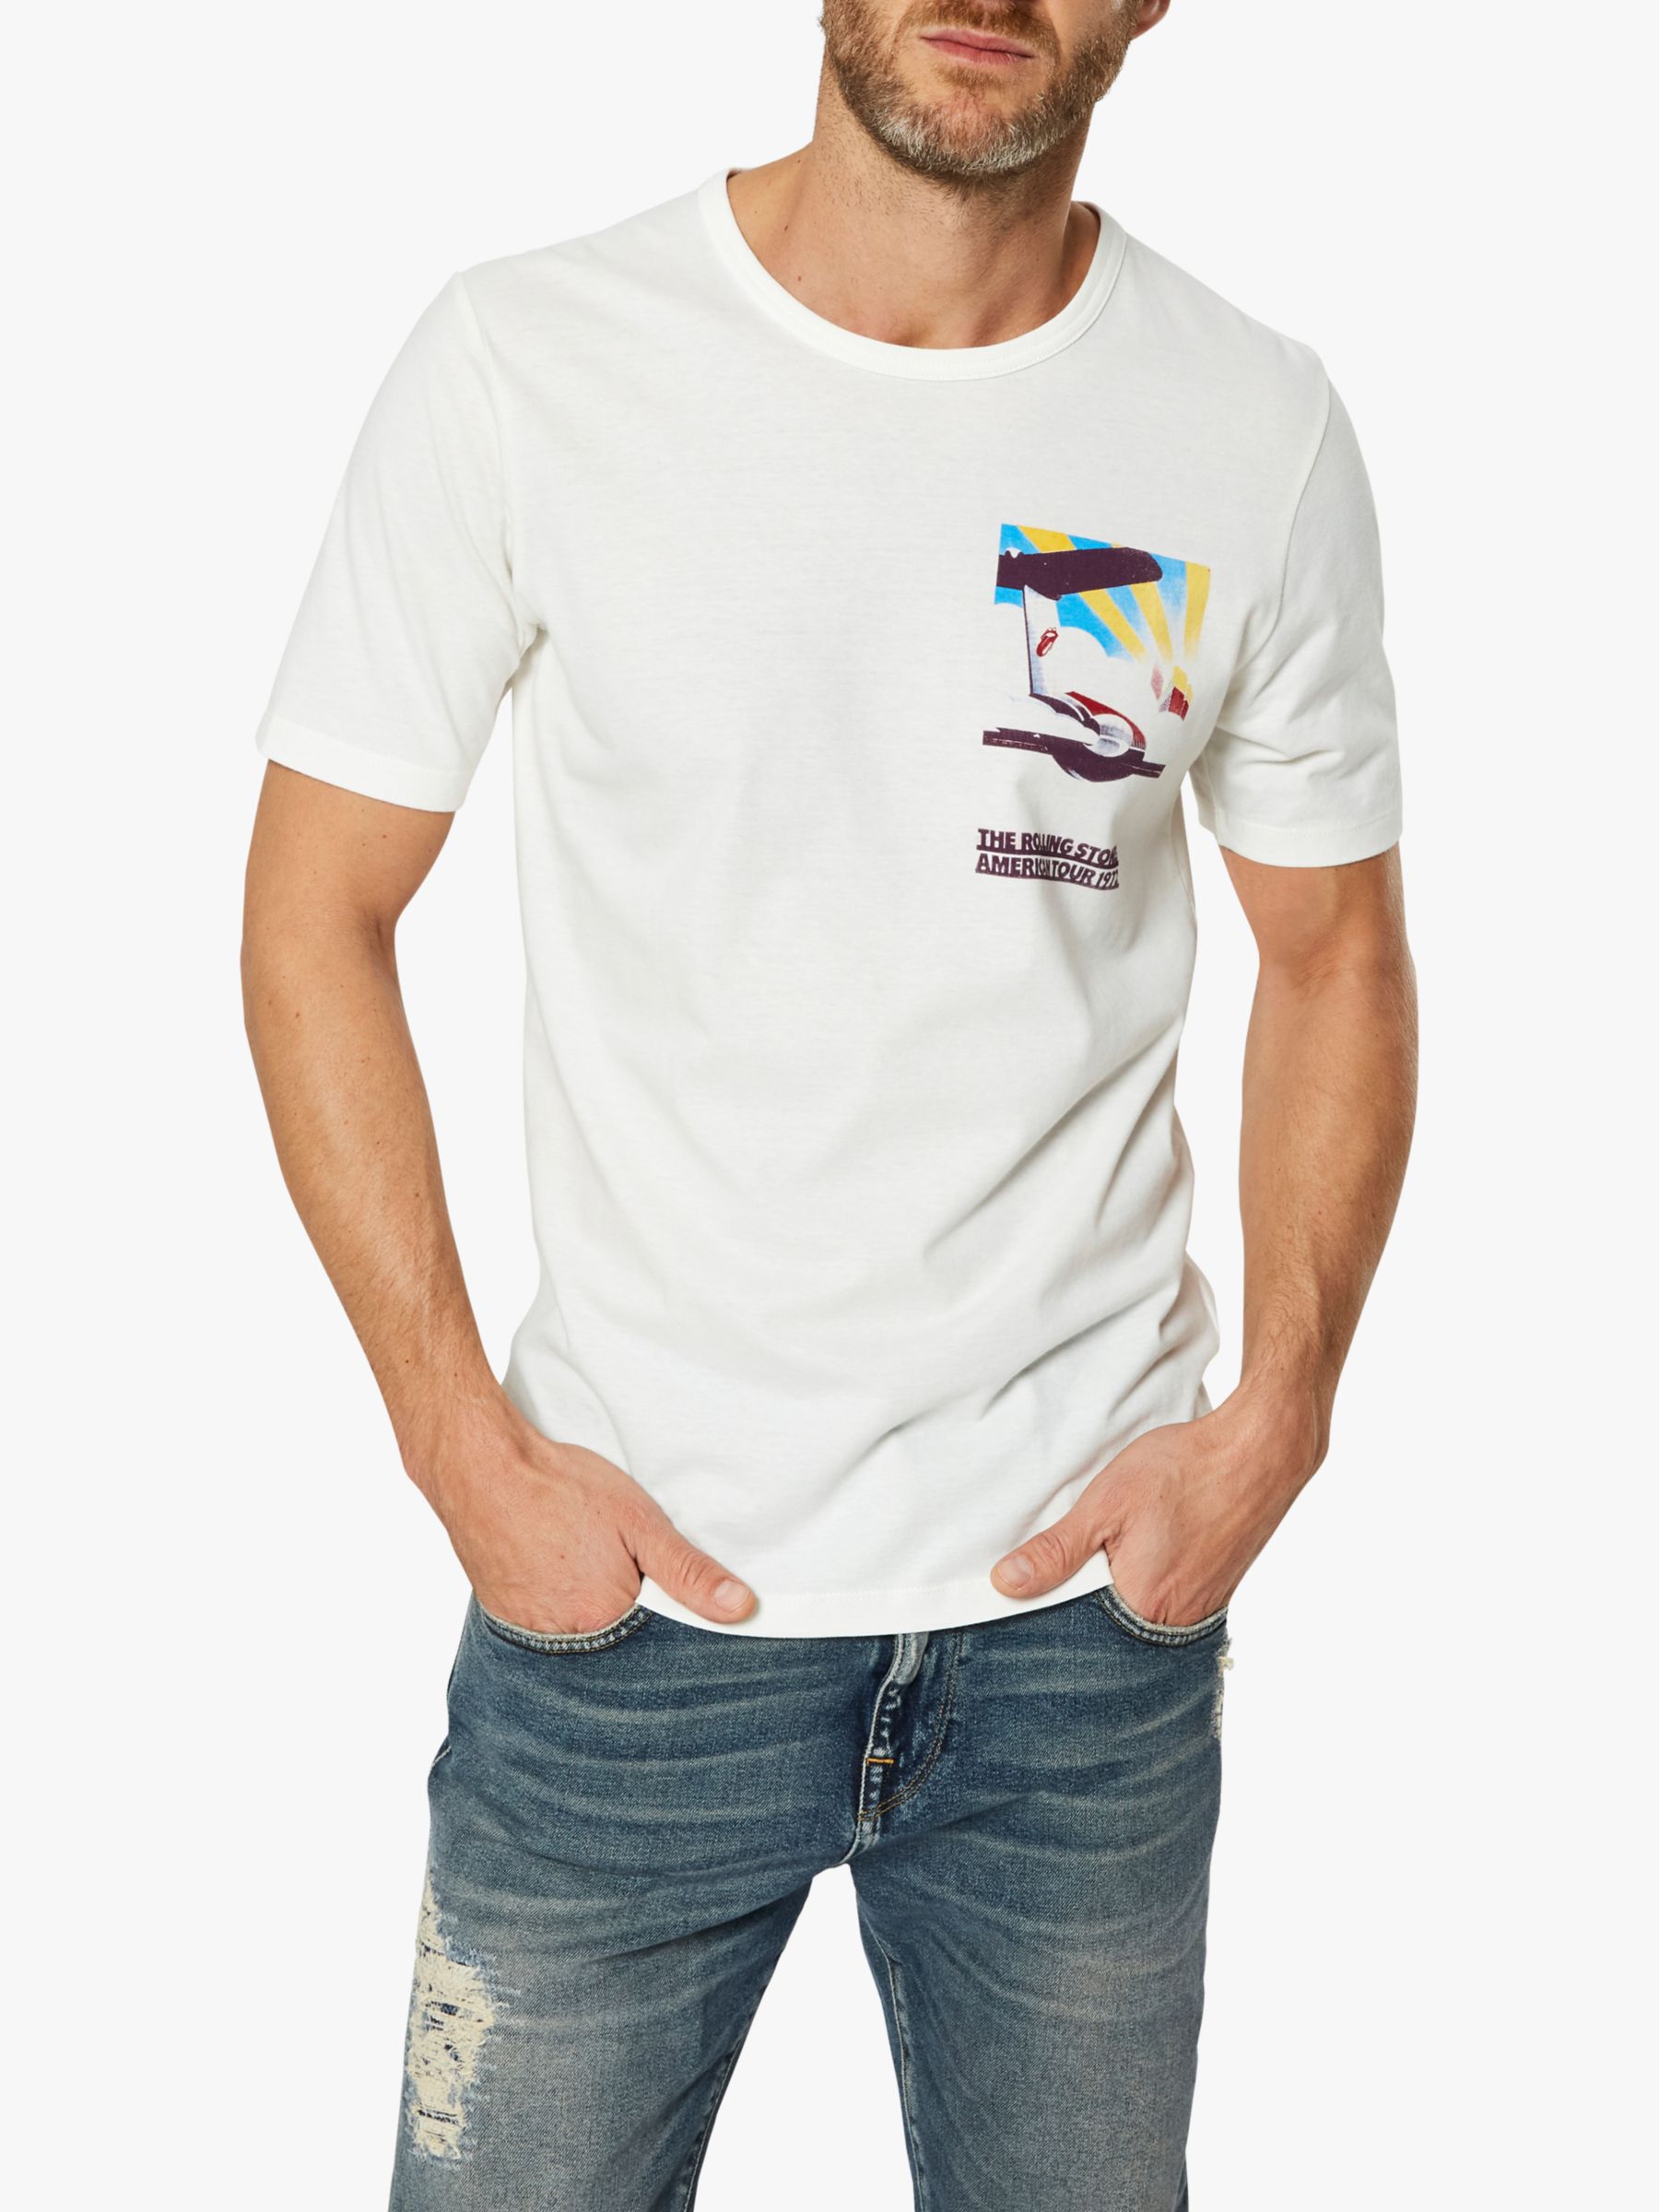 SELECTED HOMME Rolling Stones Organic Cotton T-Shirt, White at John ...